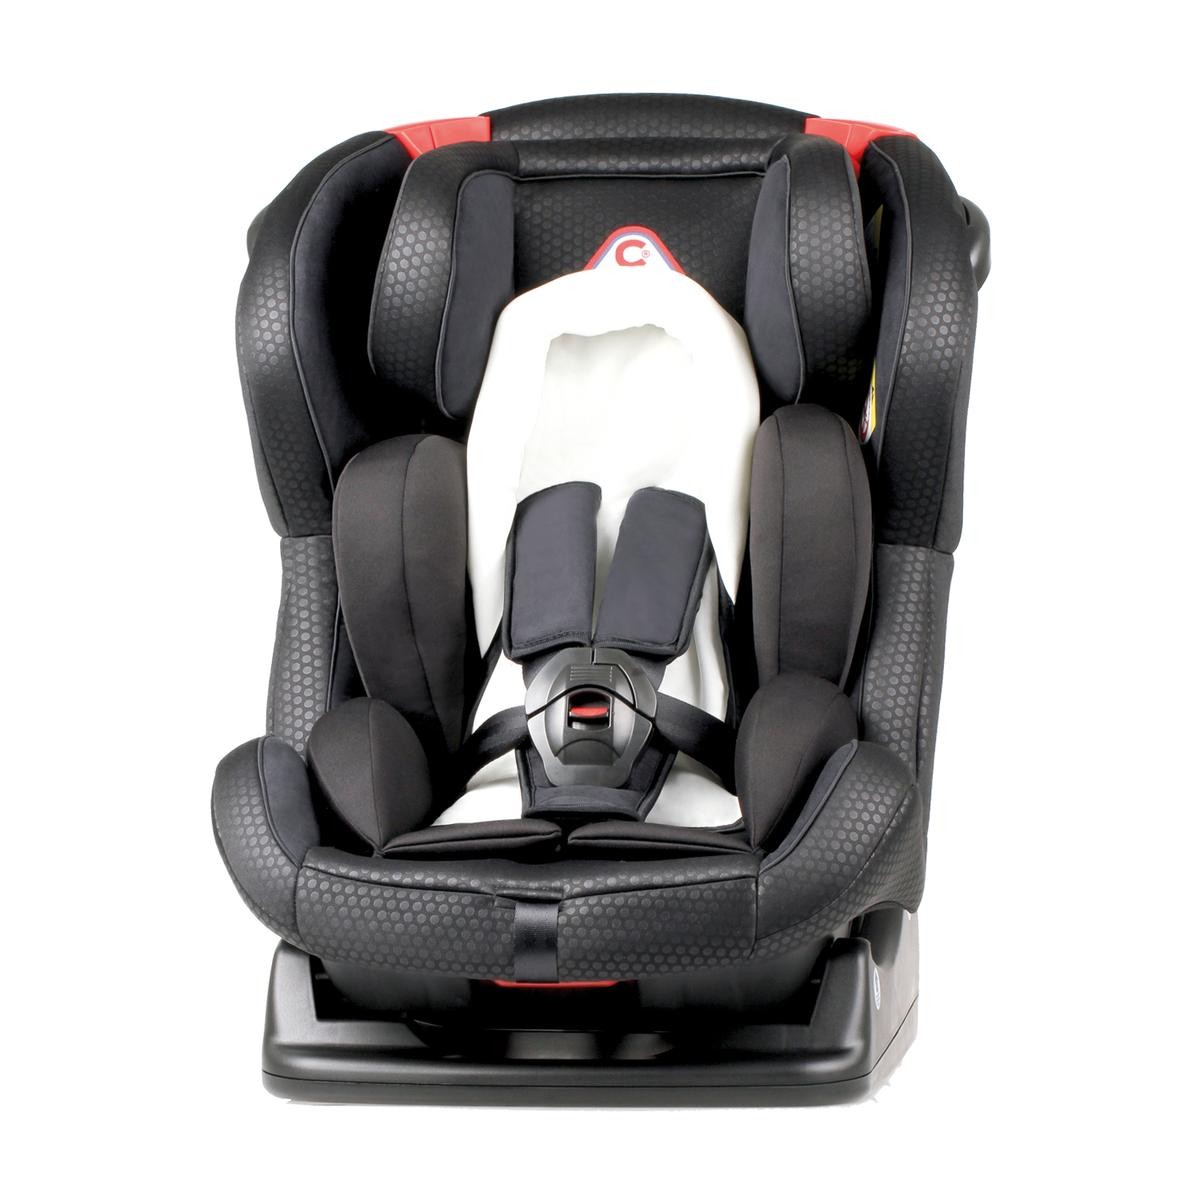 Child safety seat multi-group capsula MN2 777010